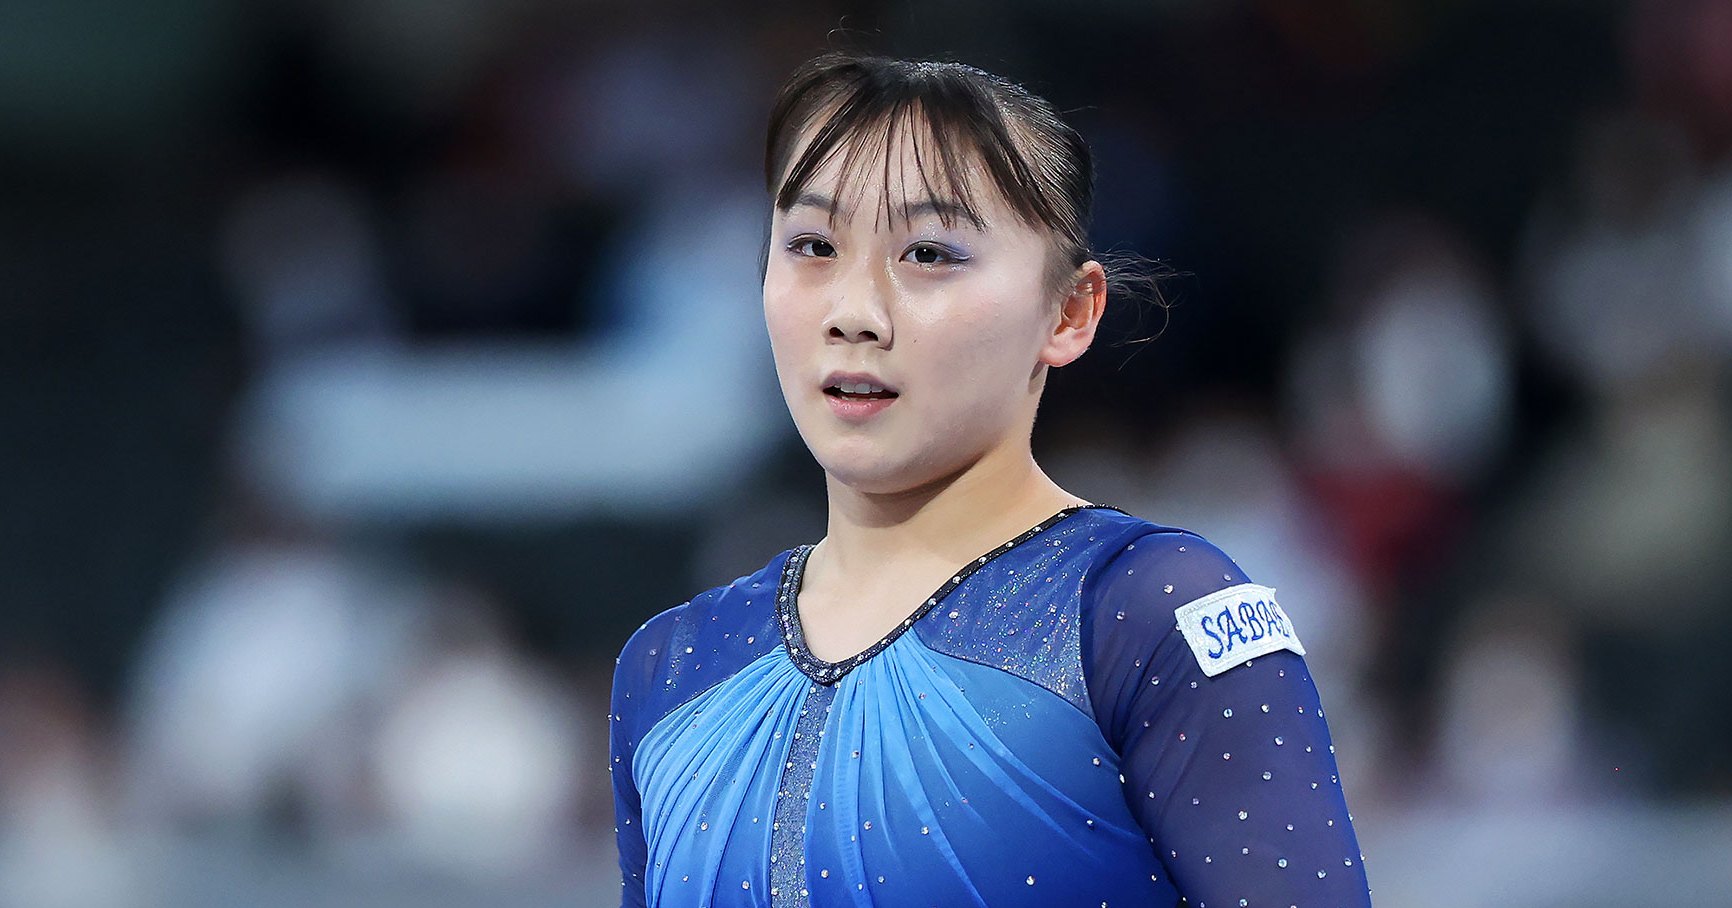 Gymnast's Olympic Dream Shattered: The Shocking Truth Behind Japan's Team Captain's Disqualification